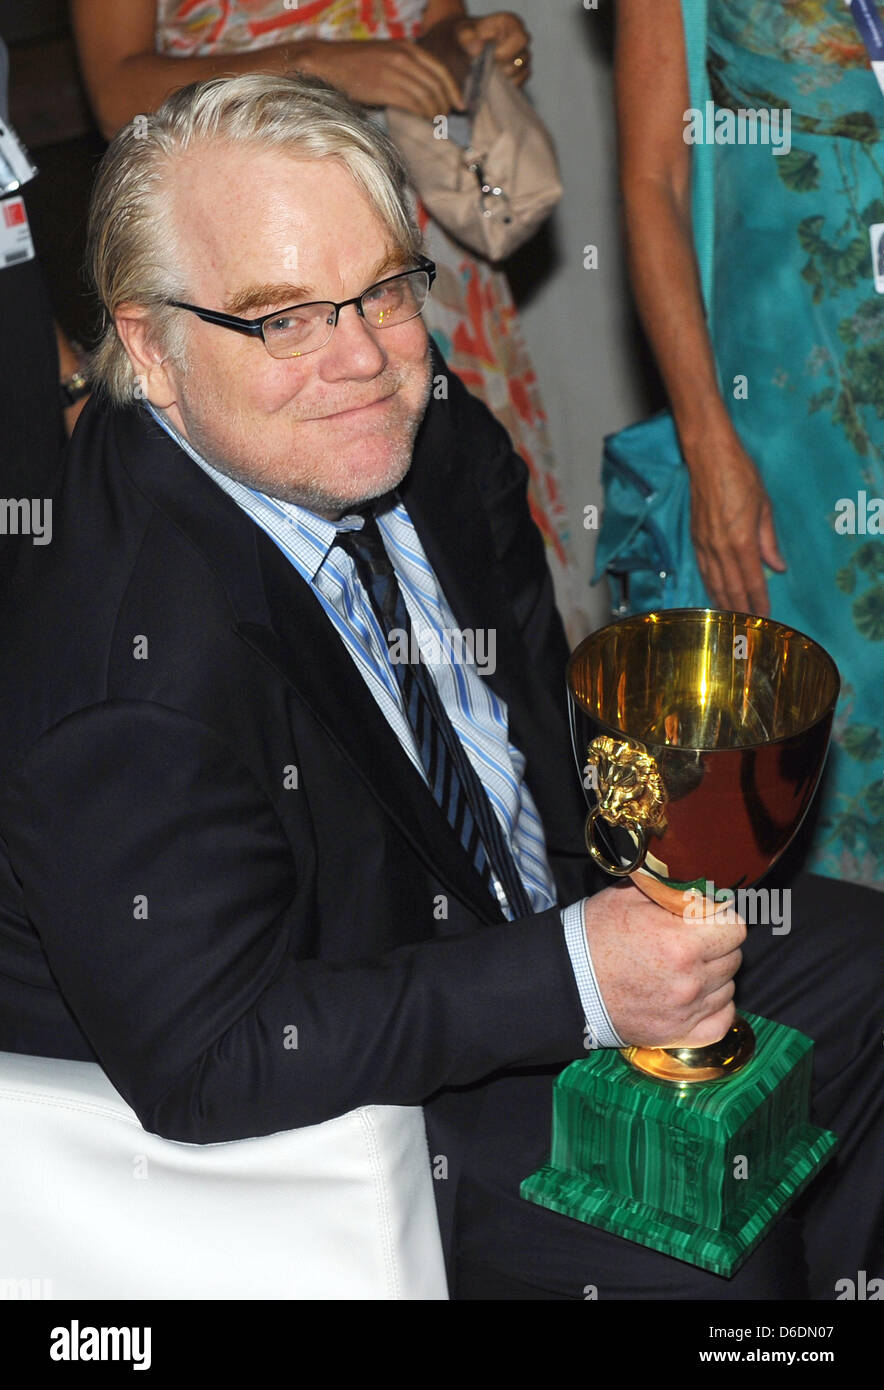 Philip Seymour Hoffman shows his Coppa Volpi award for best actor at the 69th Venice International Film Festival in Venice, Italy, 08 September 2012. Photo: Jens Kalaene Stock Photo